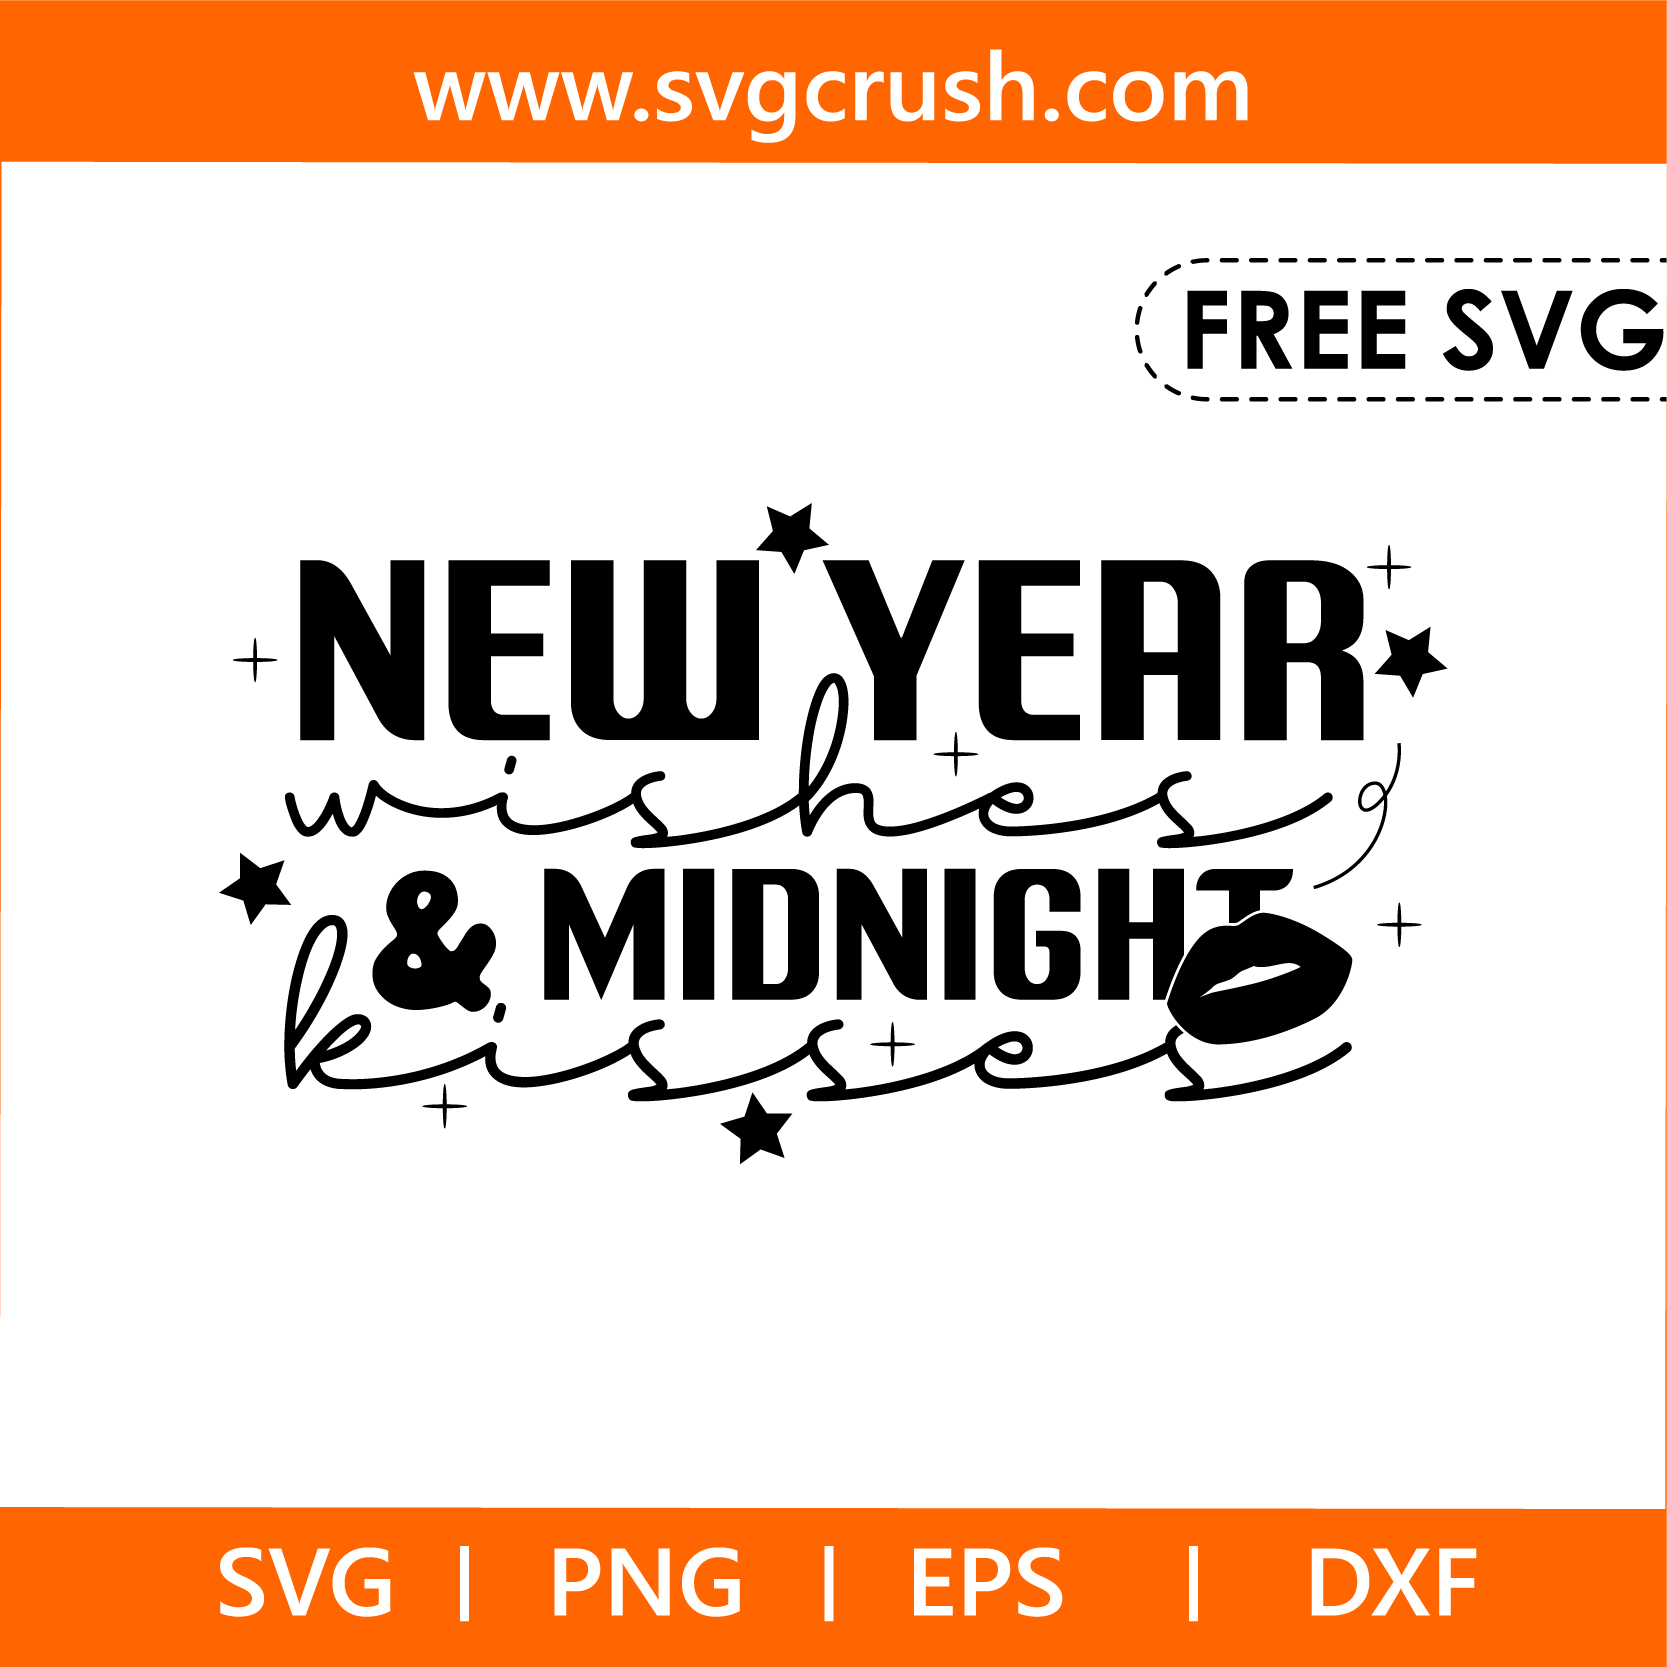 free new-year-wishes-and-midnight-kisses-004 svg